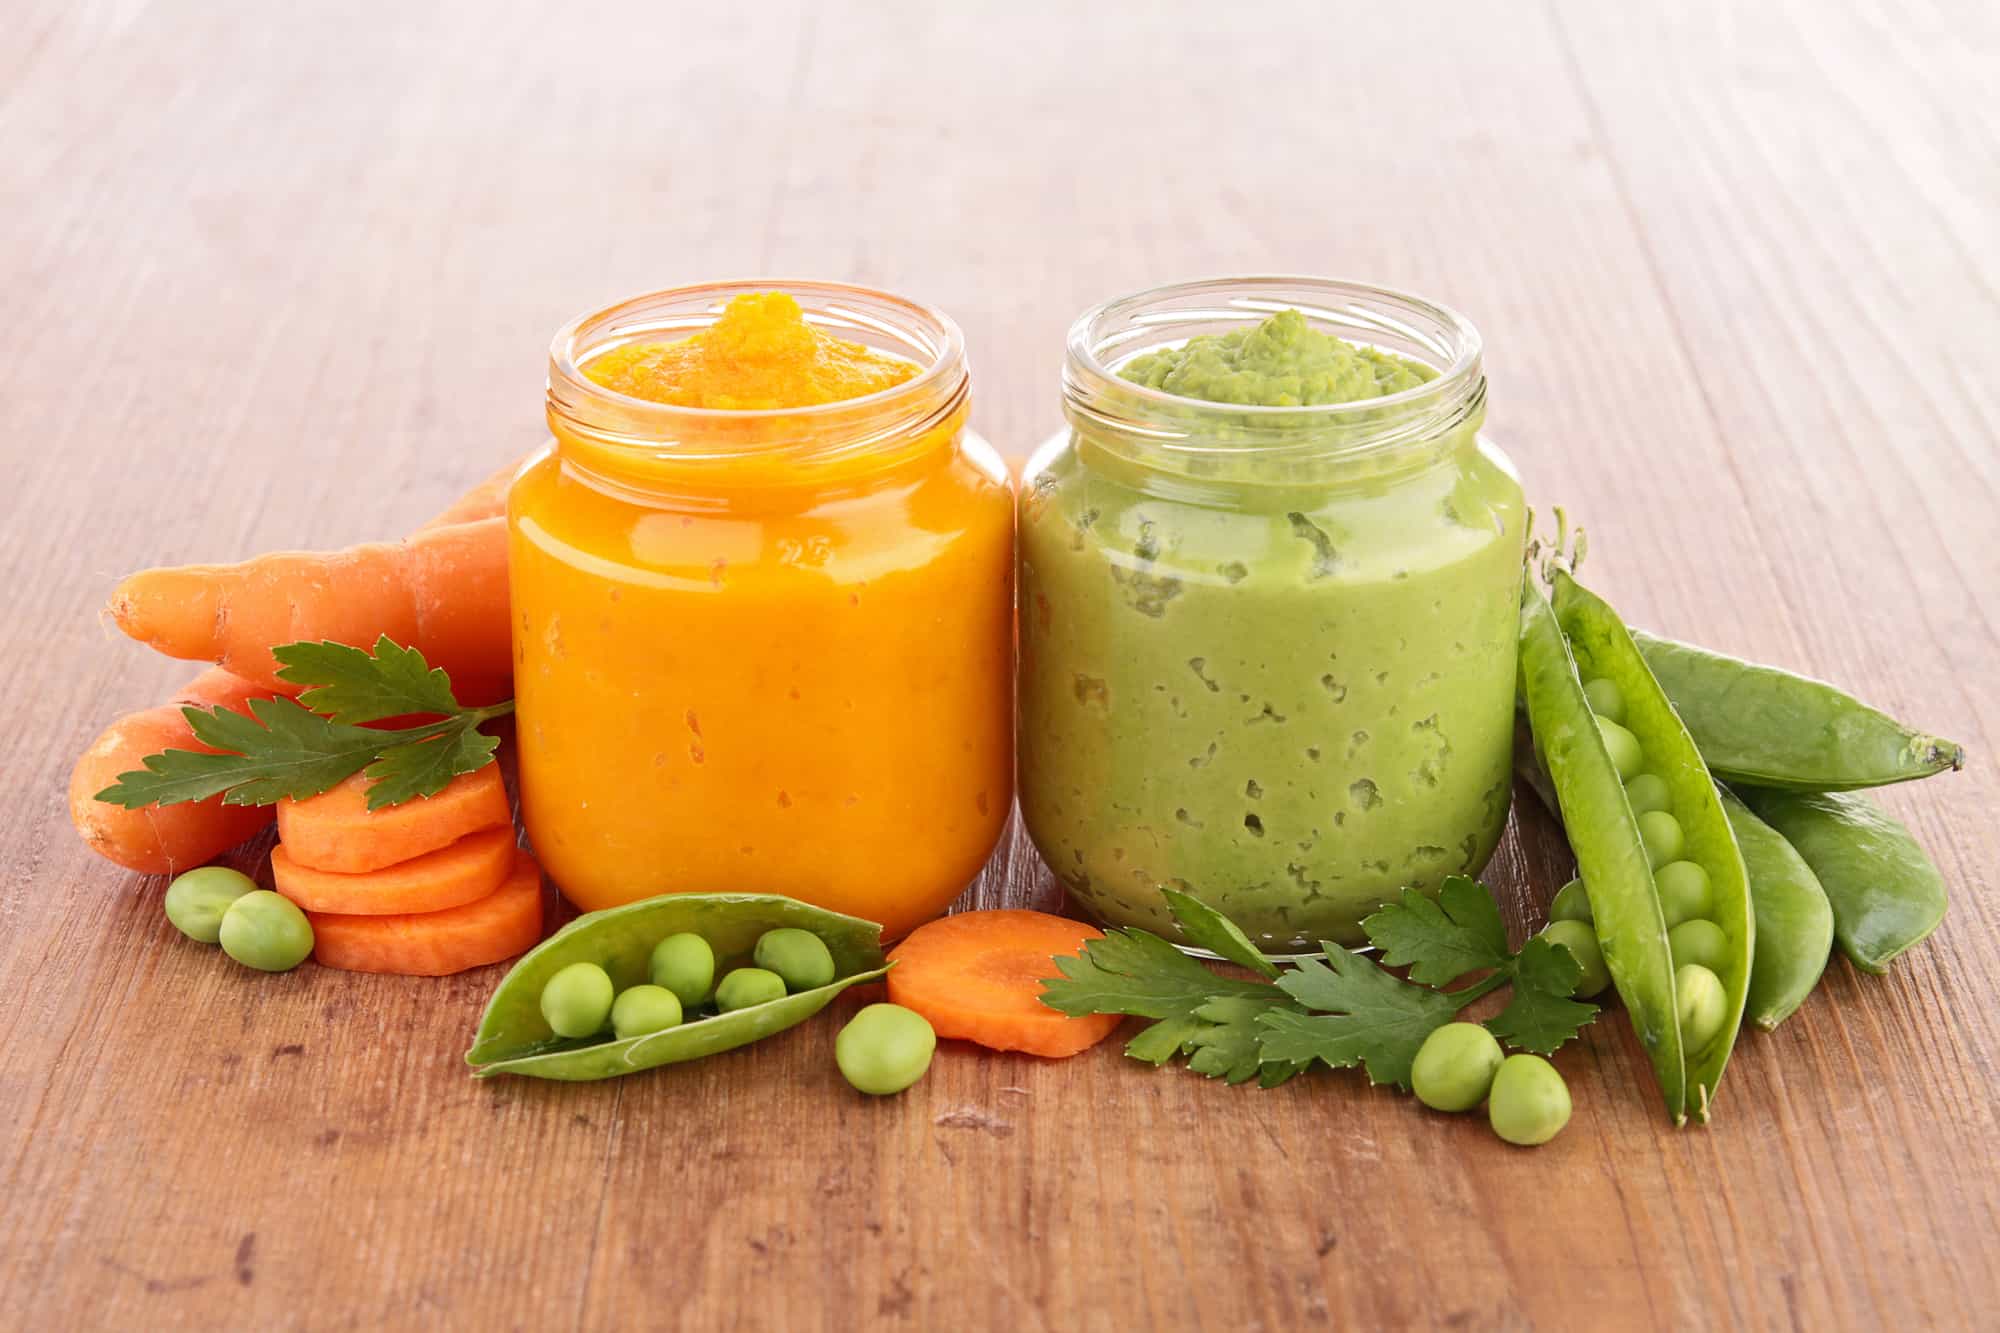 peas and carrots baby food on the wood table